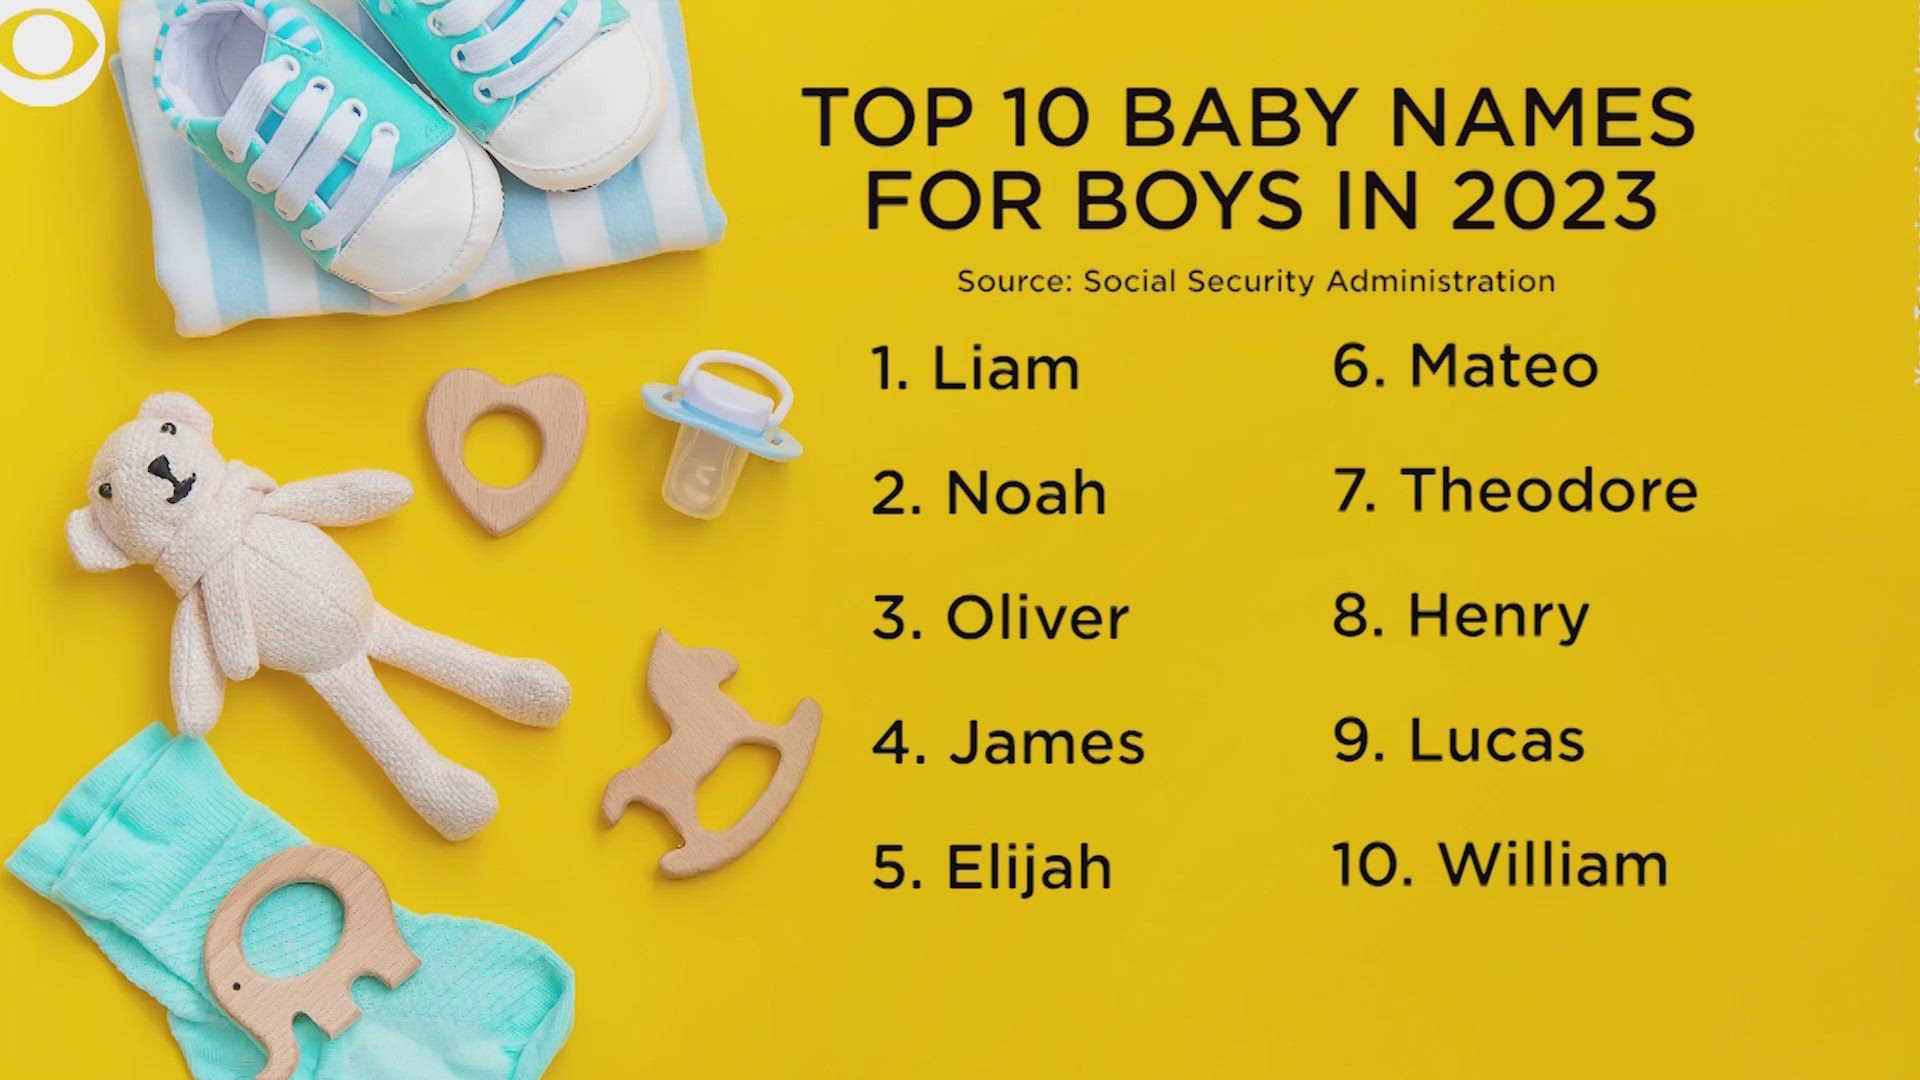 The most popular baby names are out from the Social Security Administration. Liam is at the top for boys and Olivia for girls, both for six straight years.